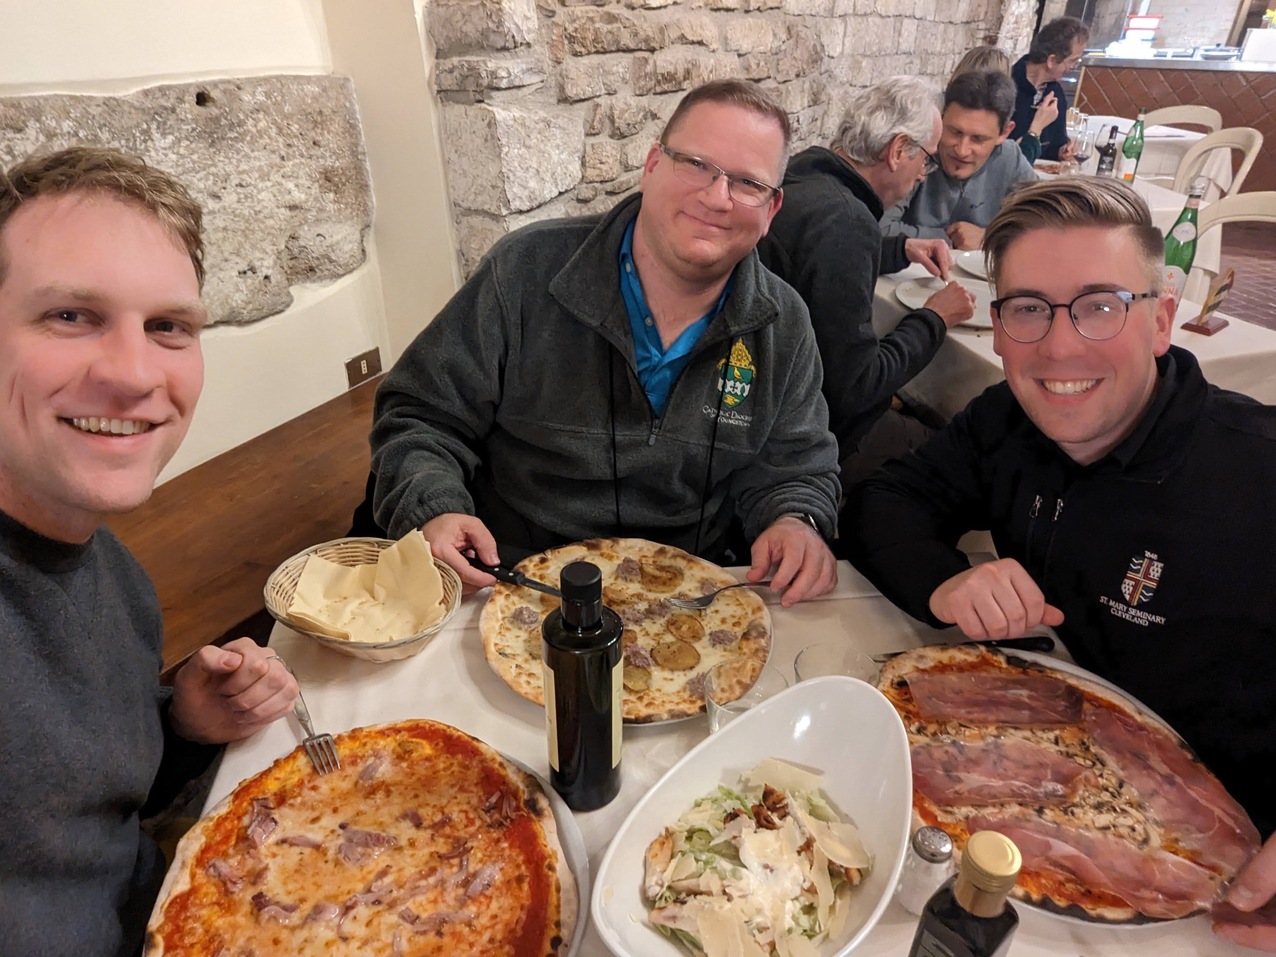 Day 7: Part of seminary group experiences Assisi